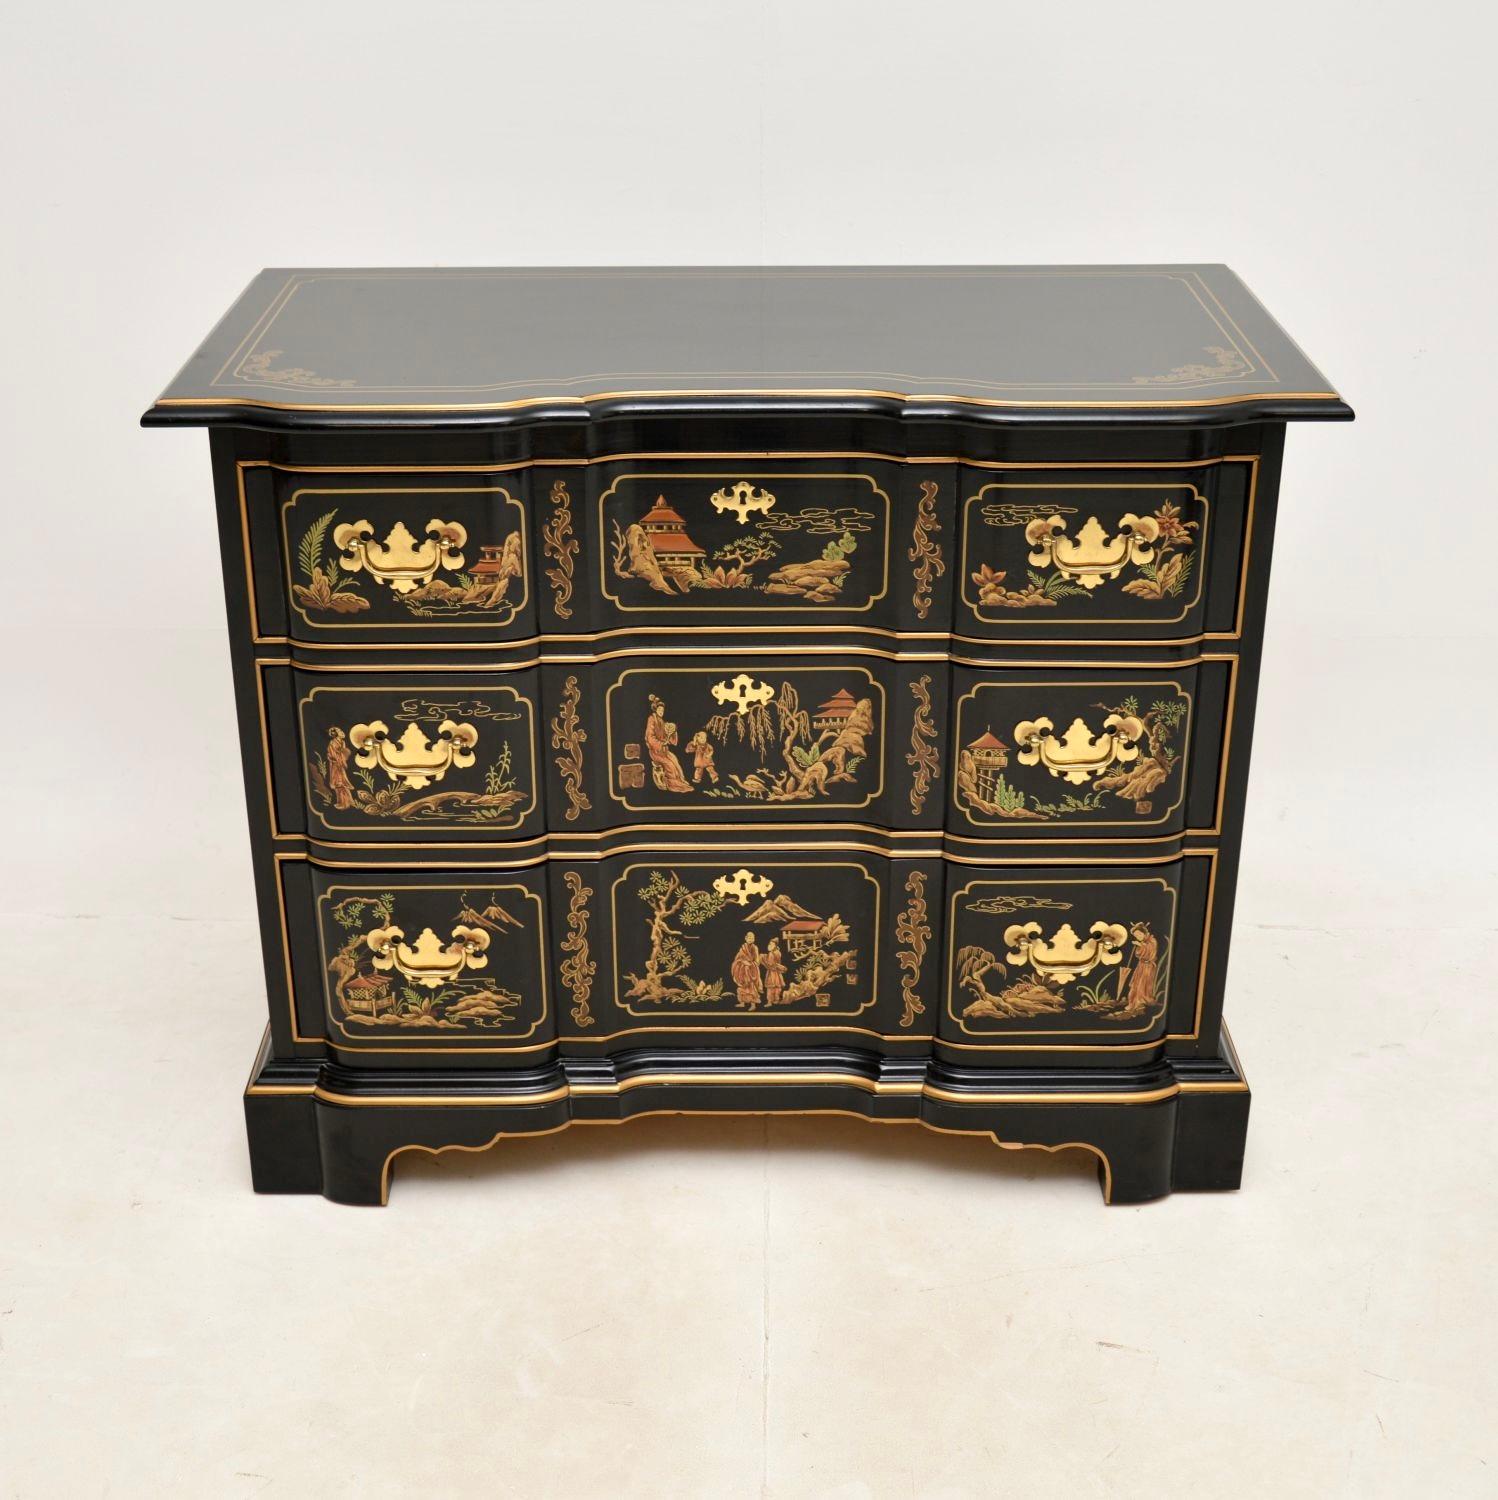 A stunning antique Georgian style lacquered chinoiserie chest of drawers. This was made in the USA by Drexel, it dates from around the 1970’s.

This is of superb quality, we obtained it privately from an amazing private residence in Knightsbridge.